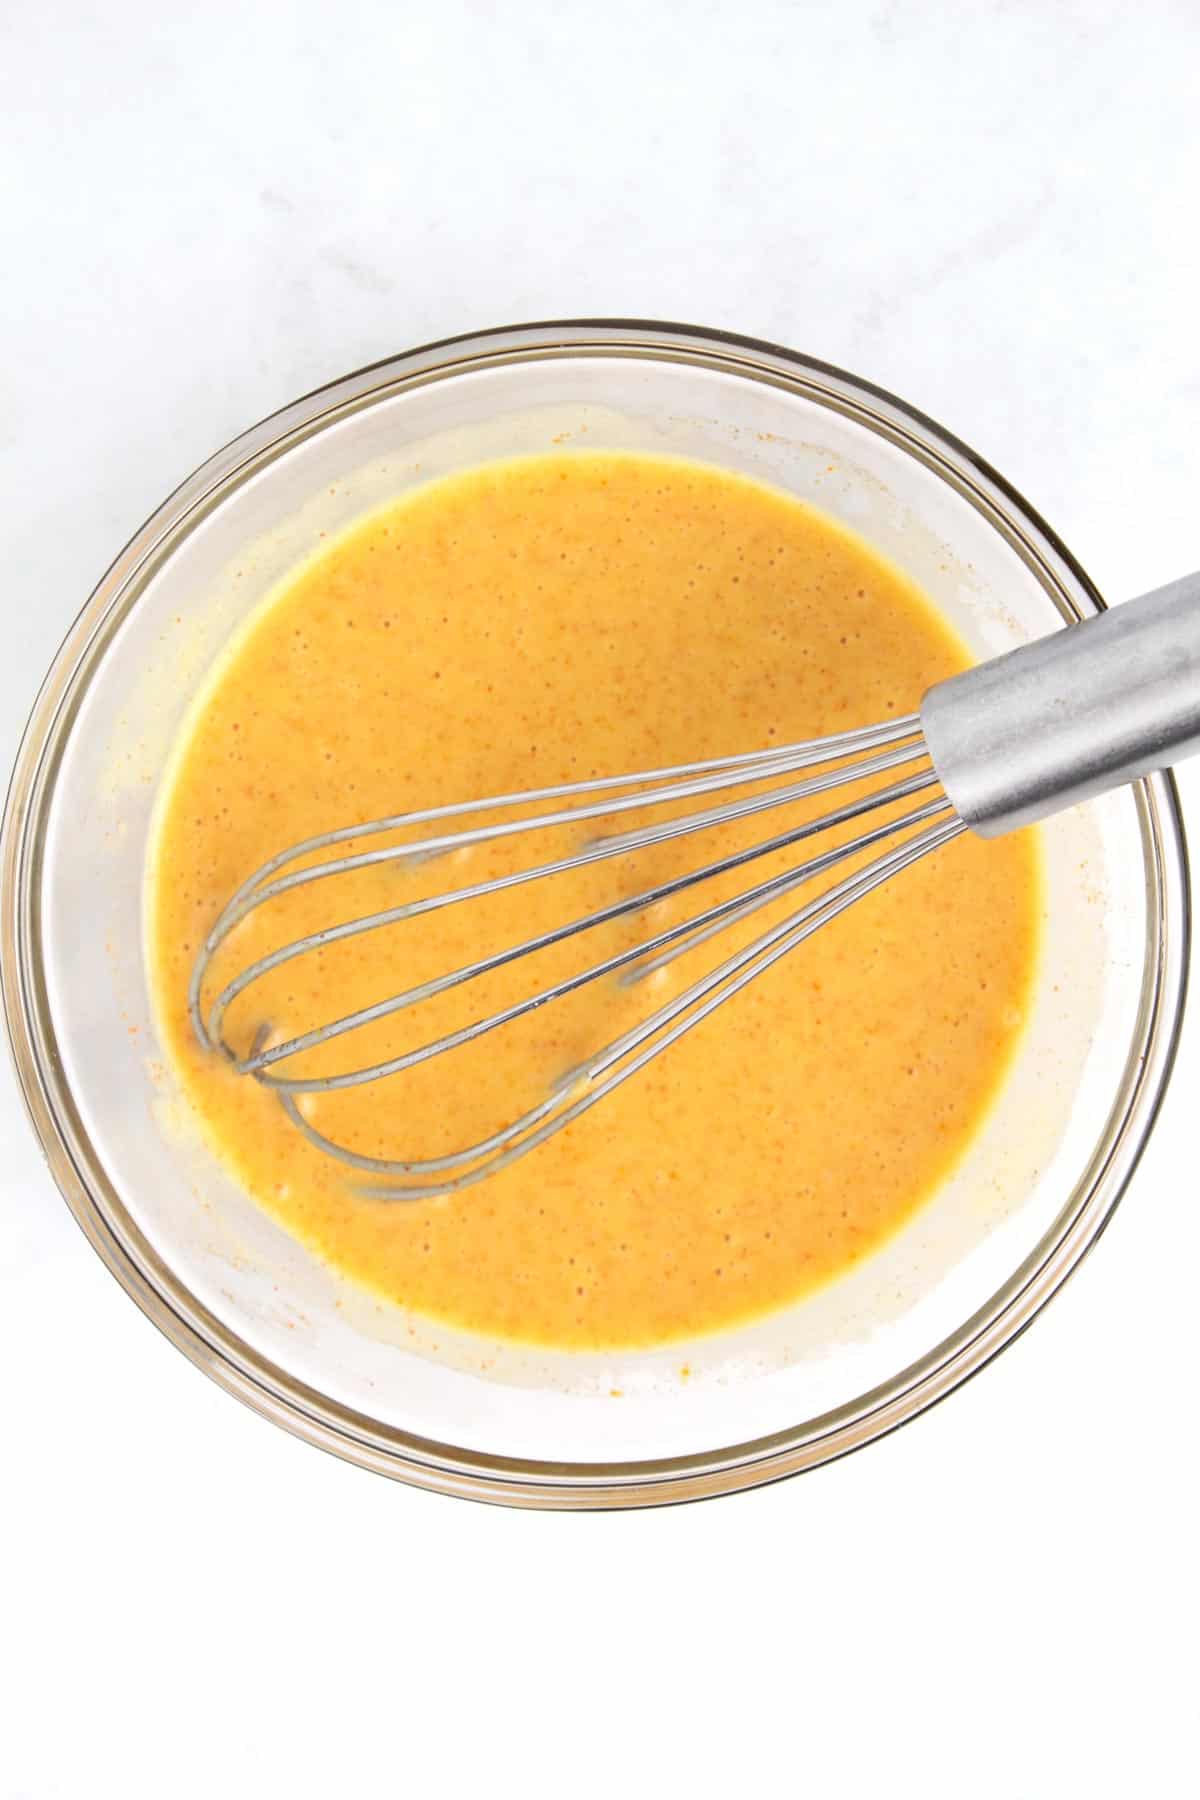 An overhead view of a clear glass bowl of combined hot honey mustard ingredients with a whisk sitting in the bowl.